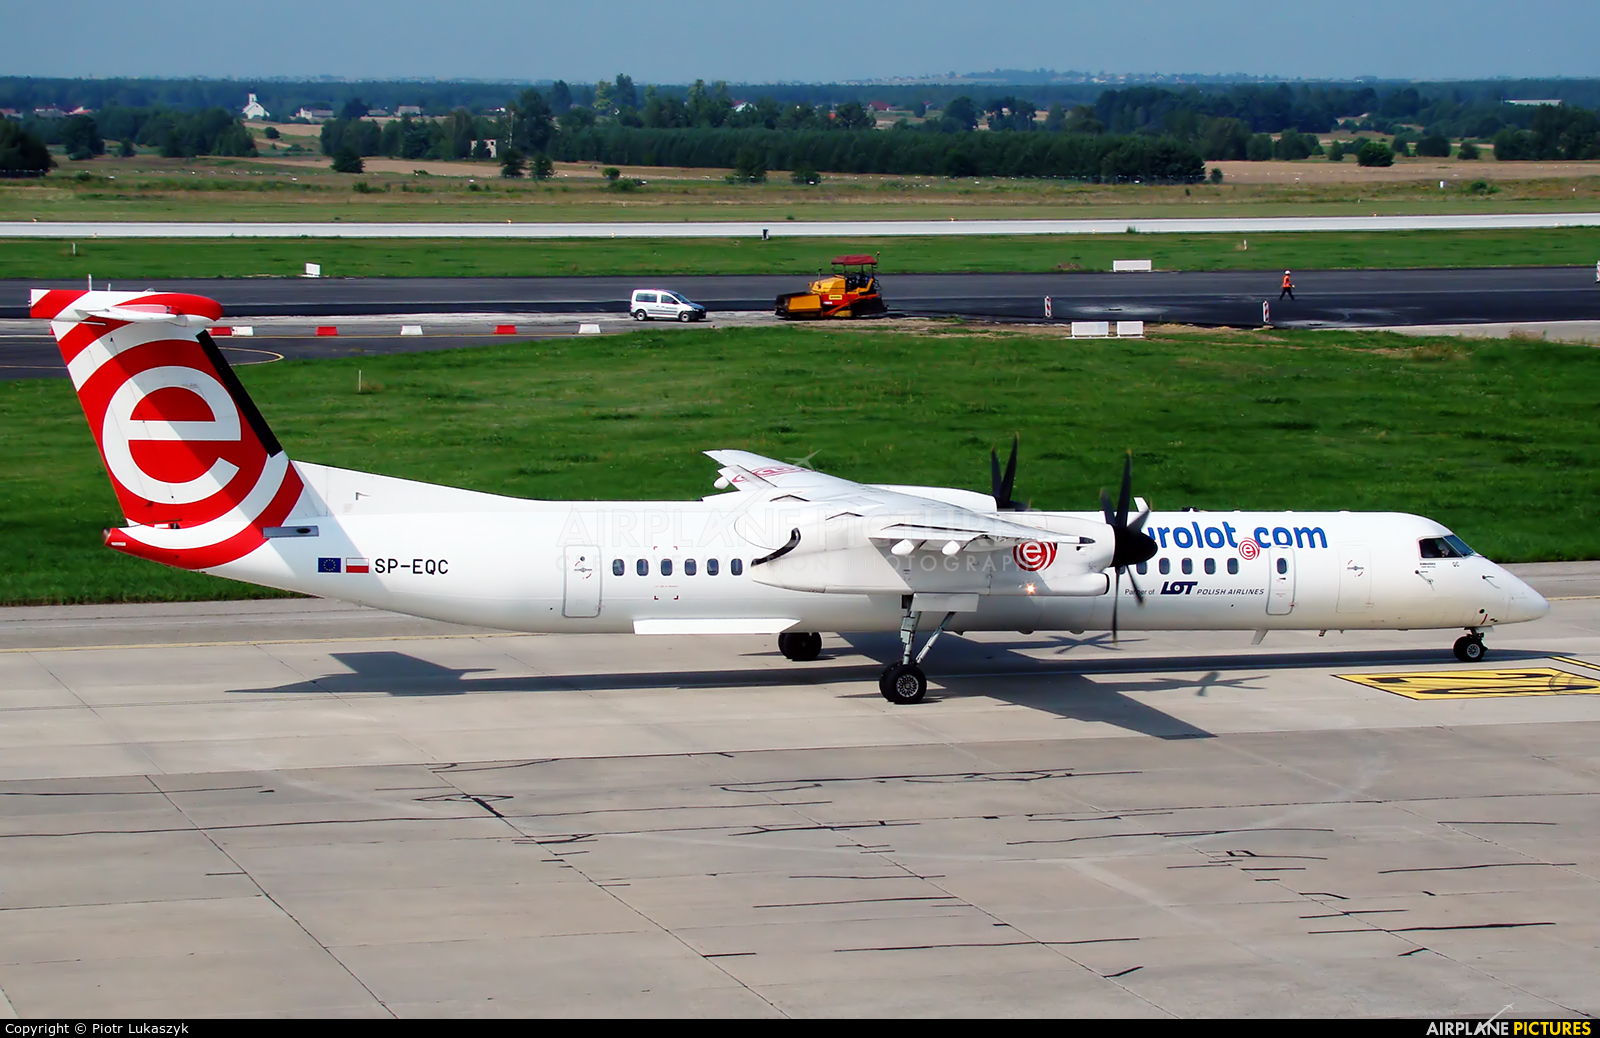 LOT - Polish Airlines SP-EQC aircraft at Katowice - Pyrzowice